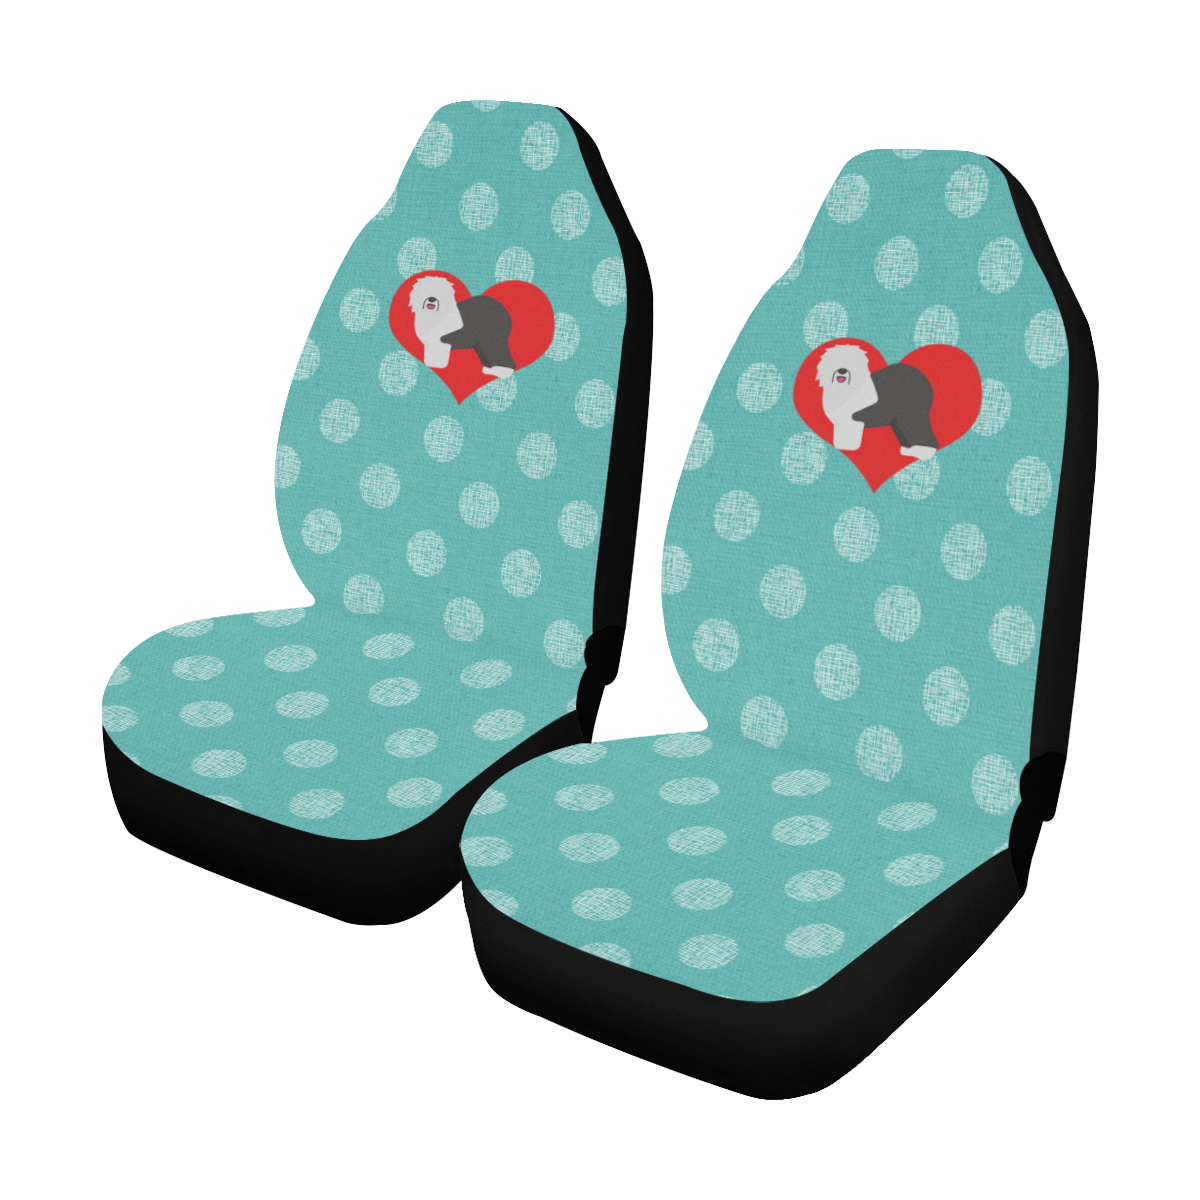 whimzy 1b Car Seat Covers (Set of 2)